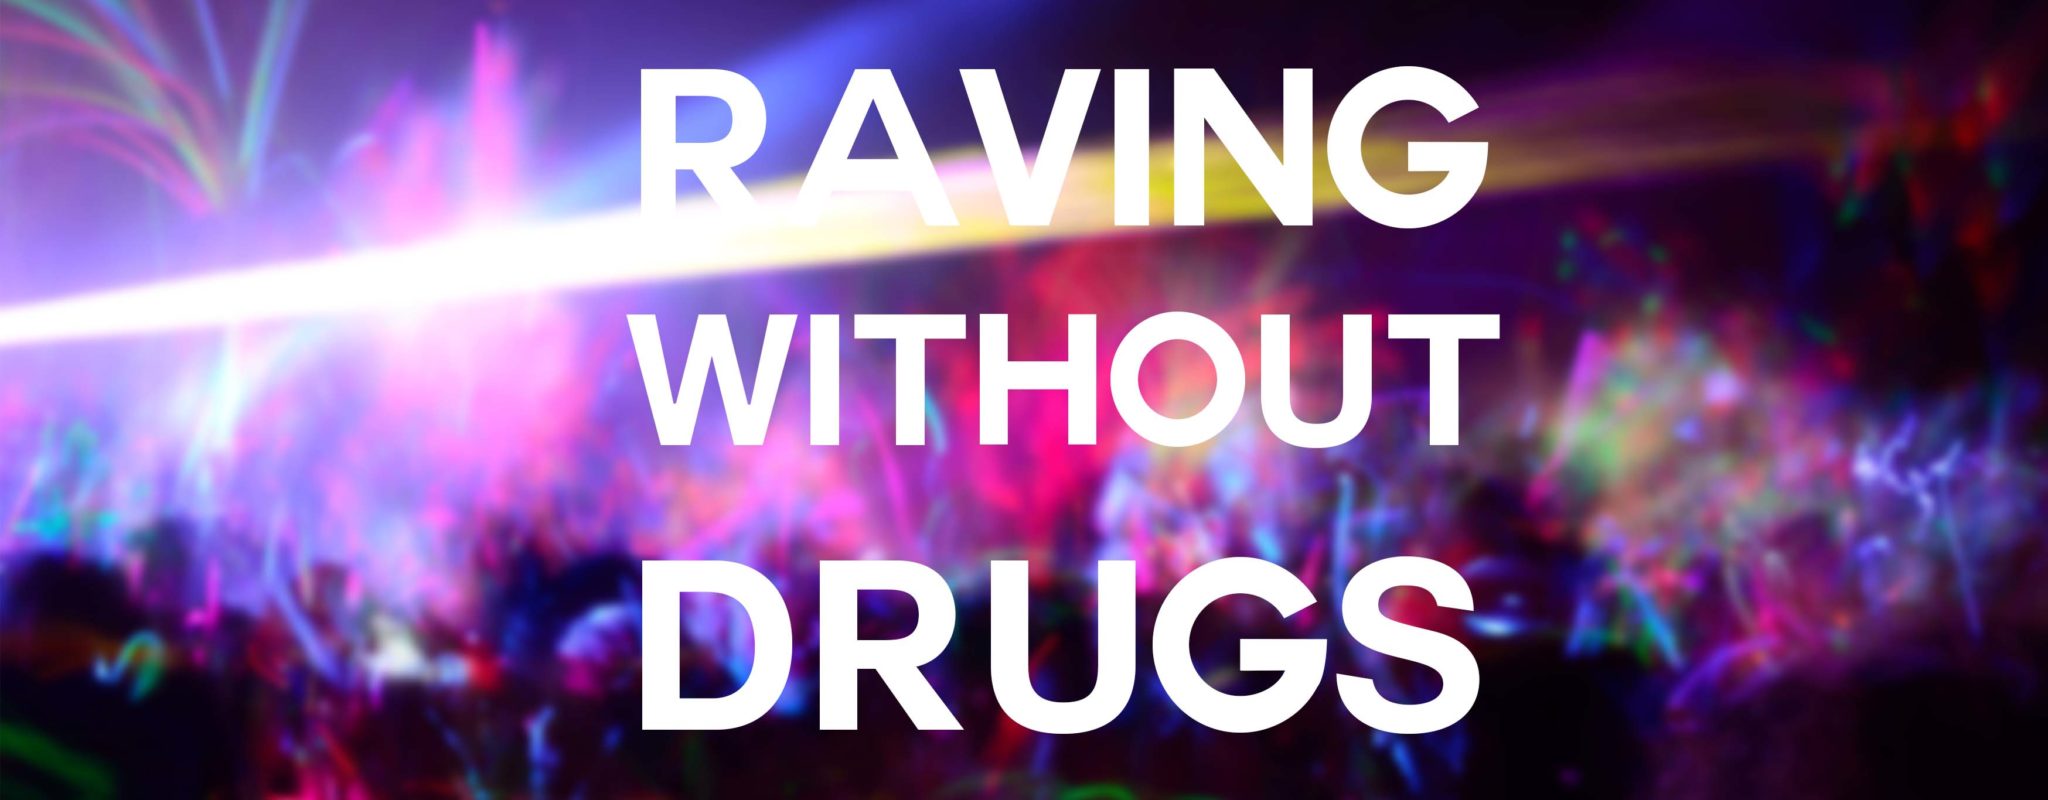 picture of people raving without drugs